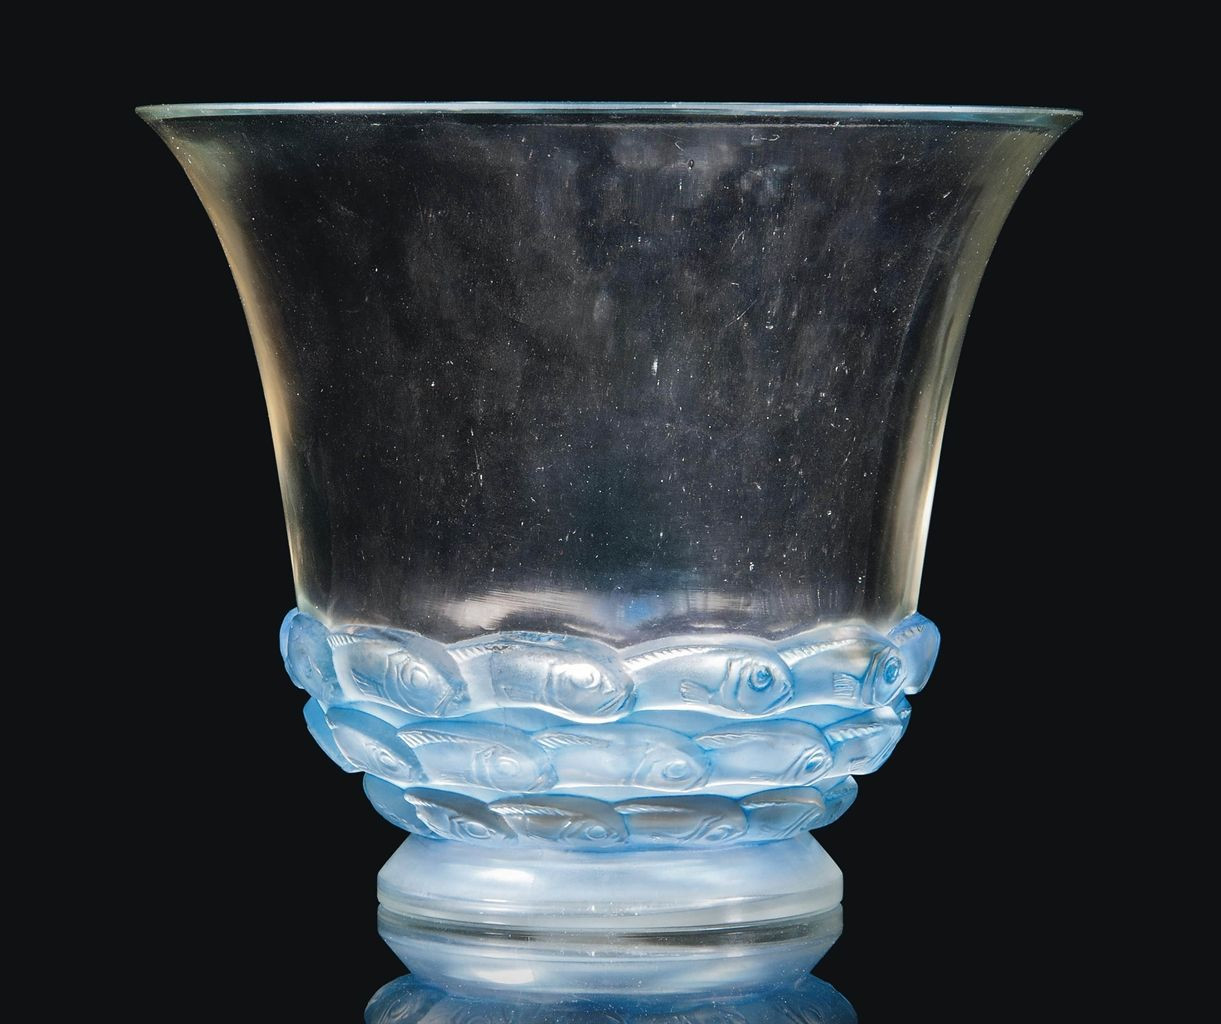 clear blue vase of monaco vase no 1049 designed 1930 clear frosted and blue stained regarding monaco vase no 1049 designed 1930 clear frosted and blue stained stencilled